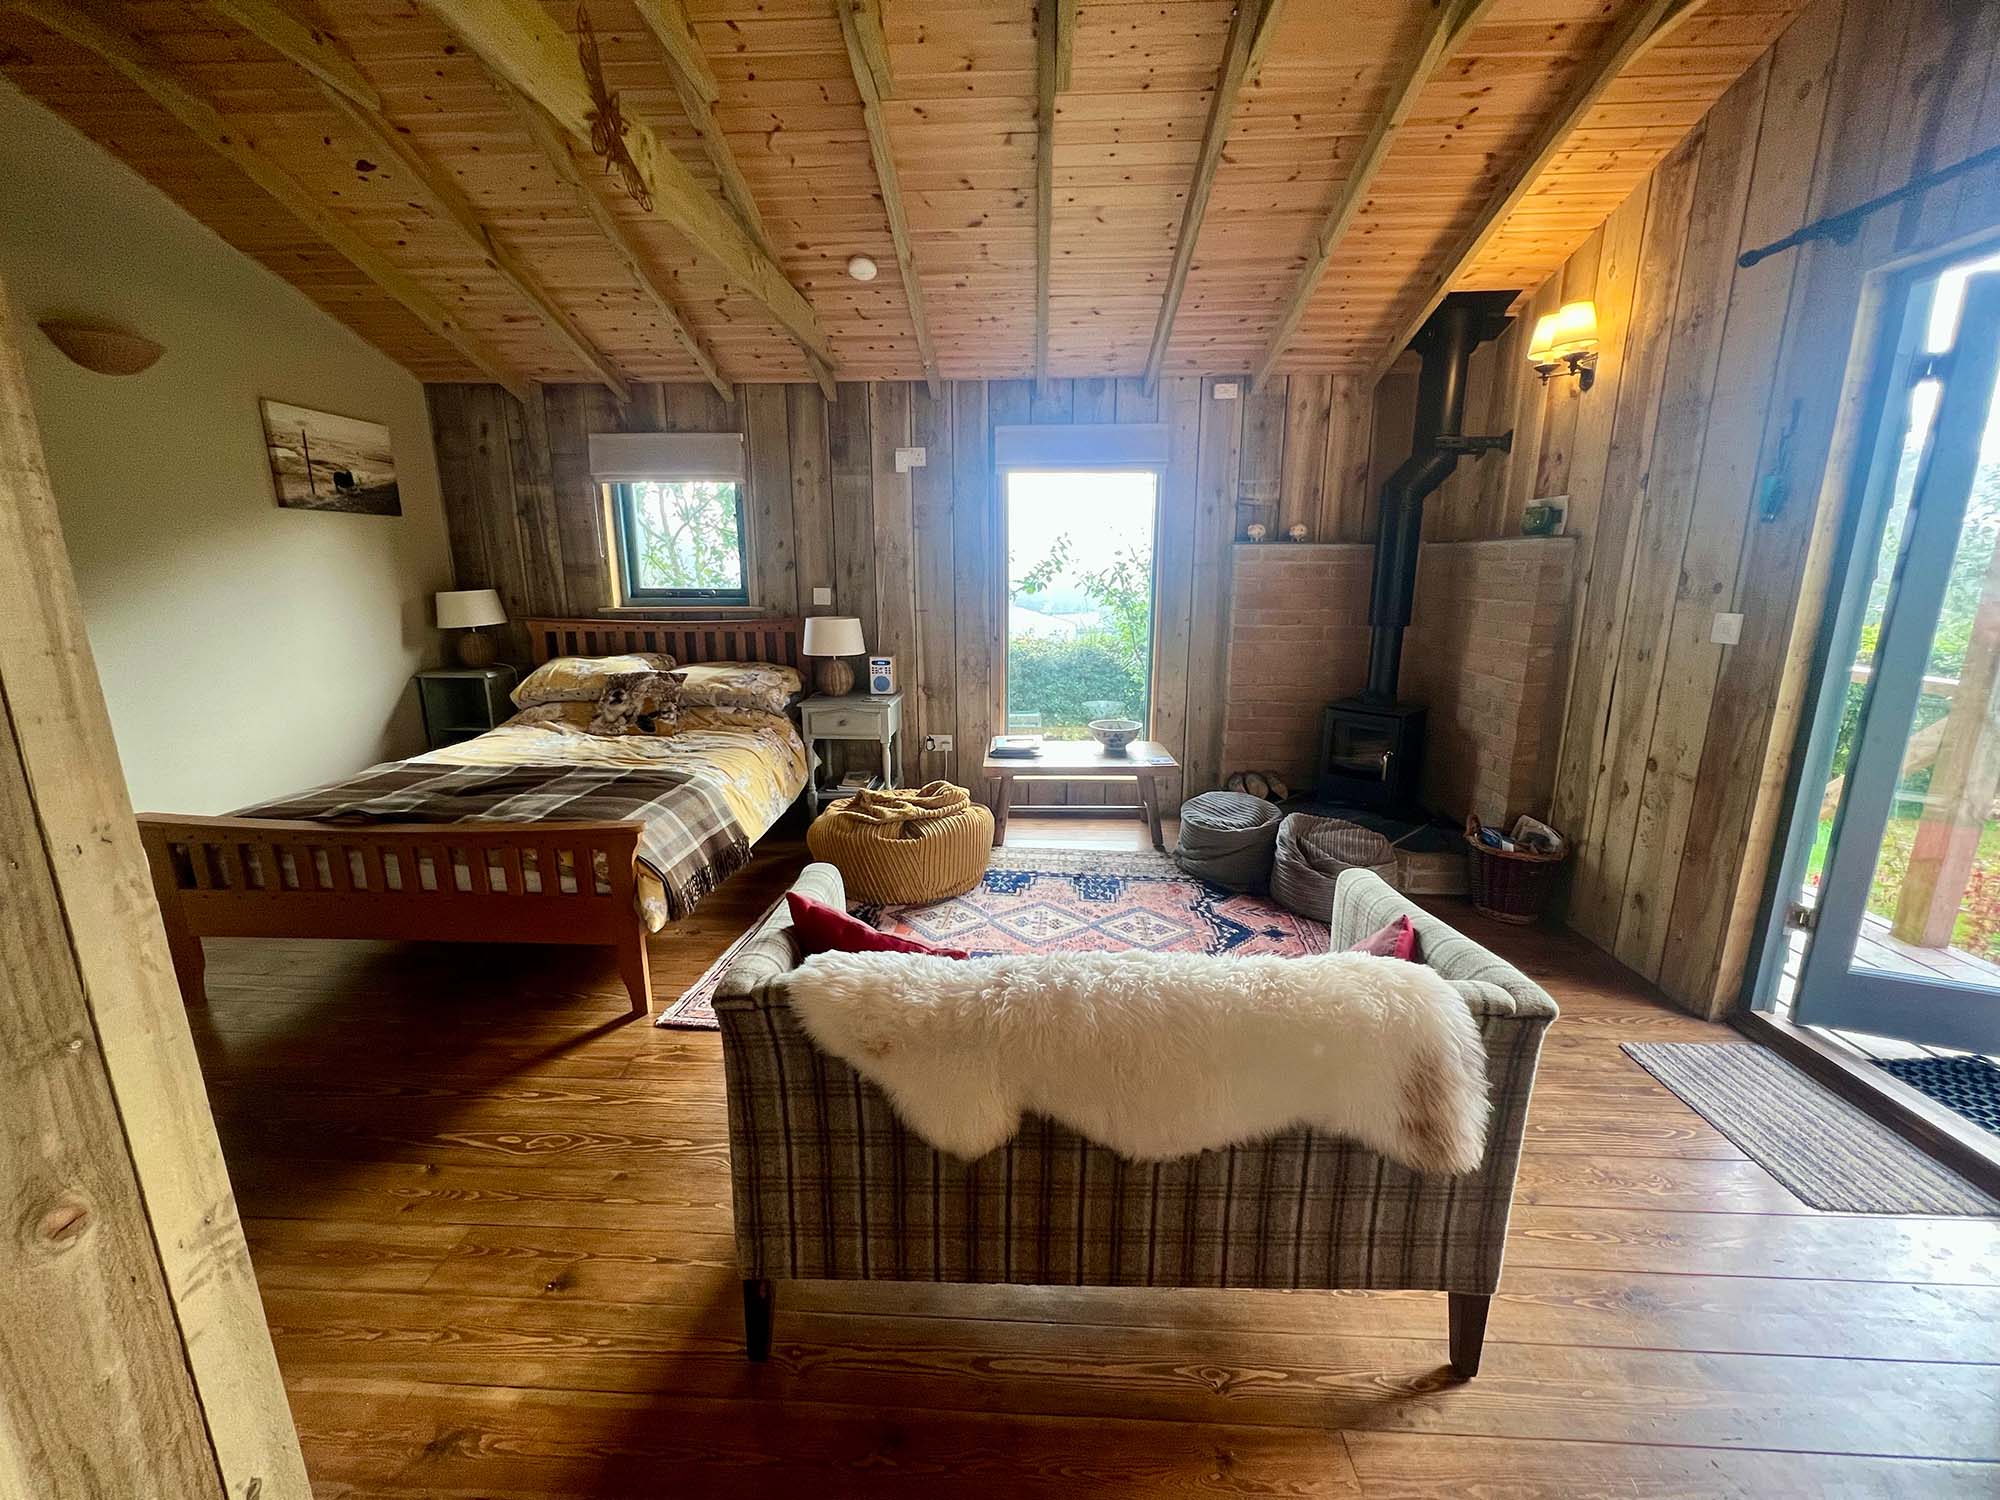 Luxury Glamping in Dartmoor National Park – room with a view